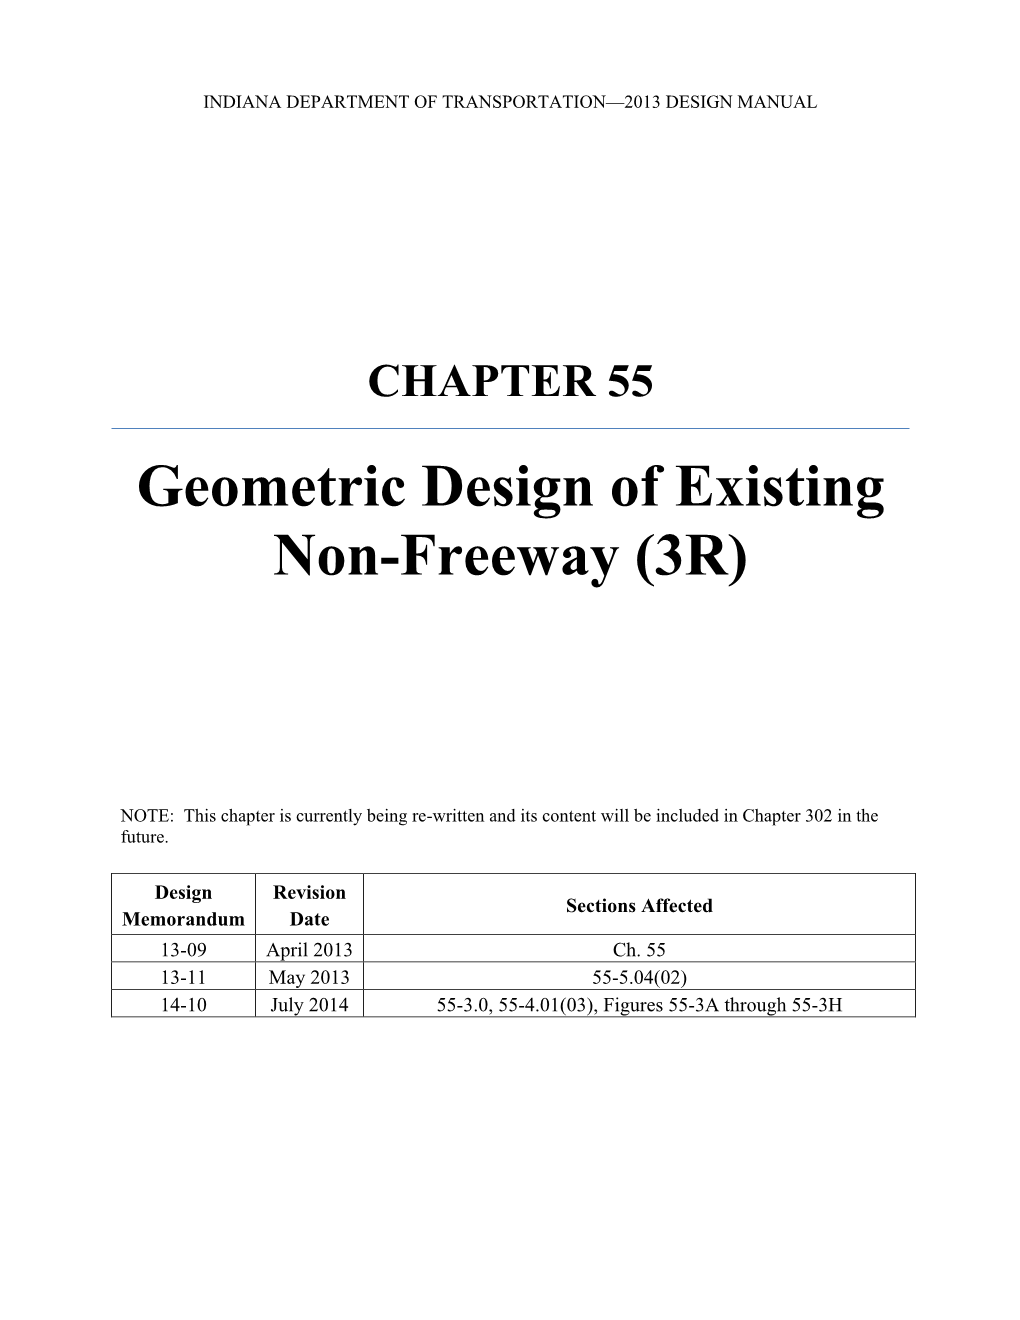 CHAPTER 55 Geometric Design of Existing Non-Freeway (3R)